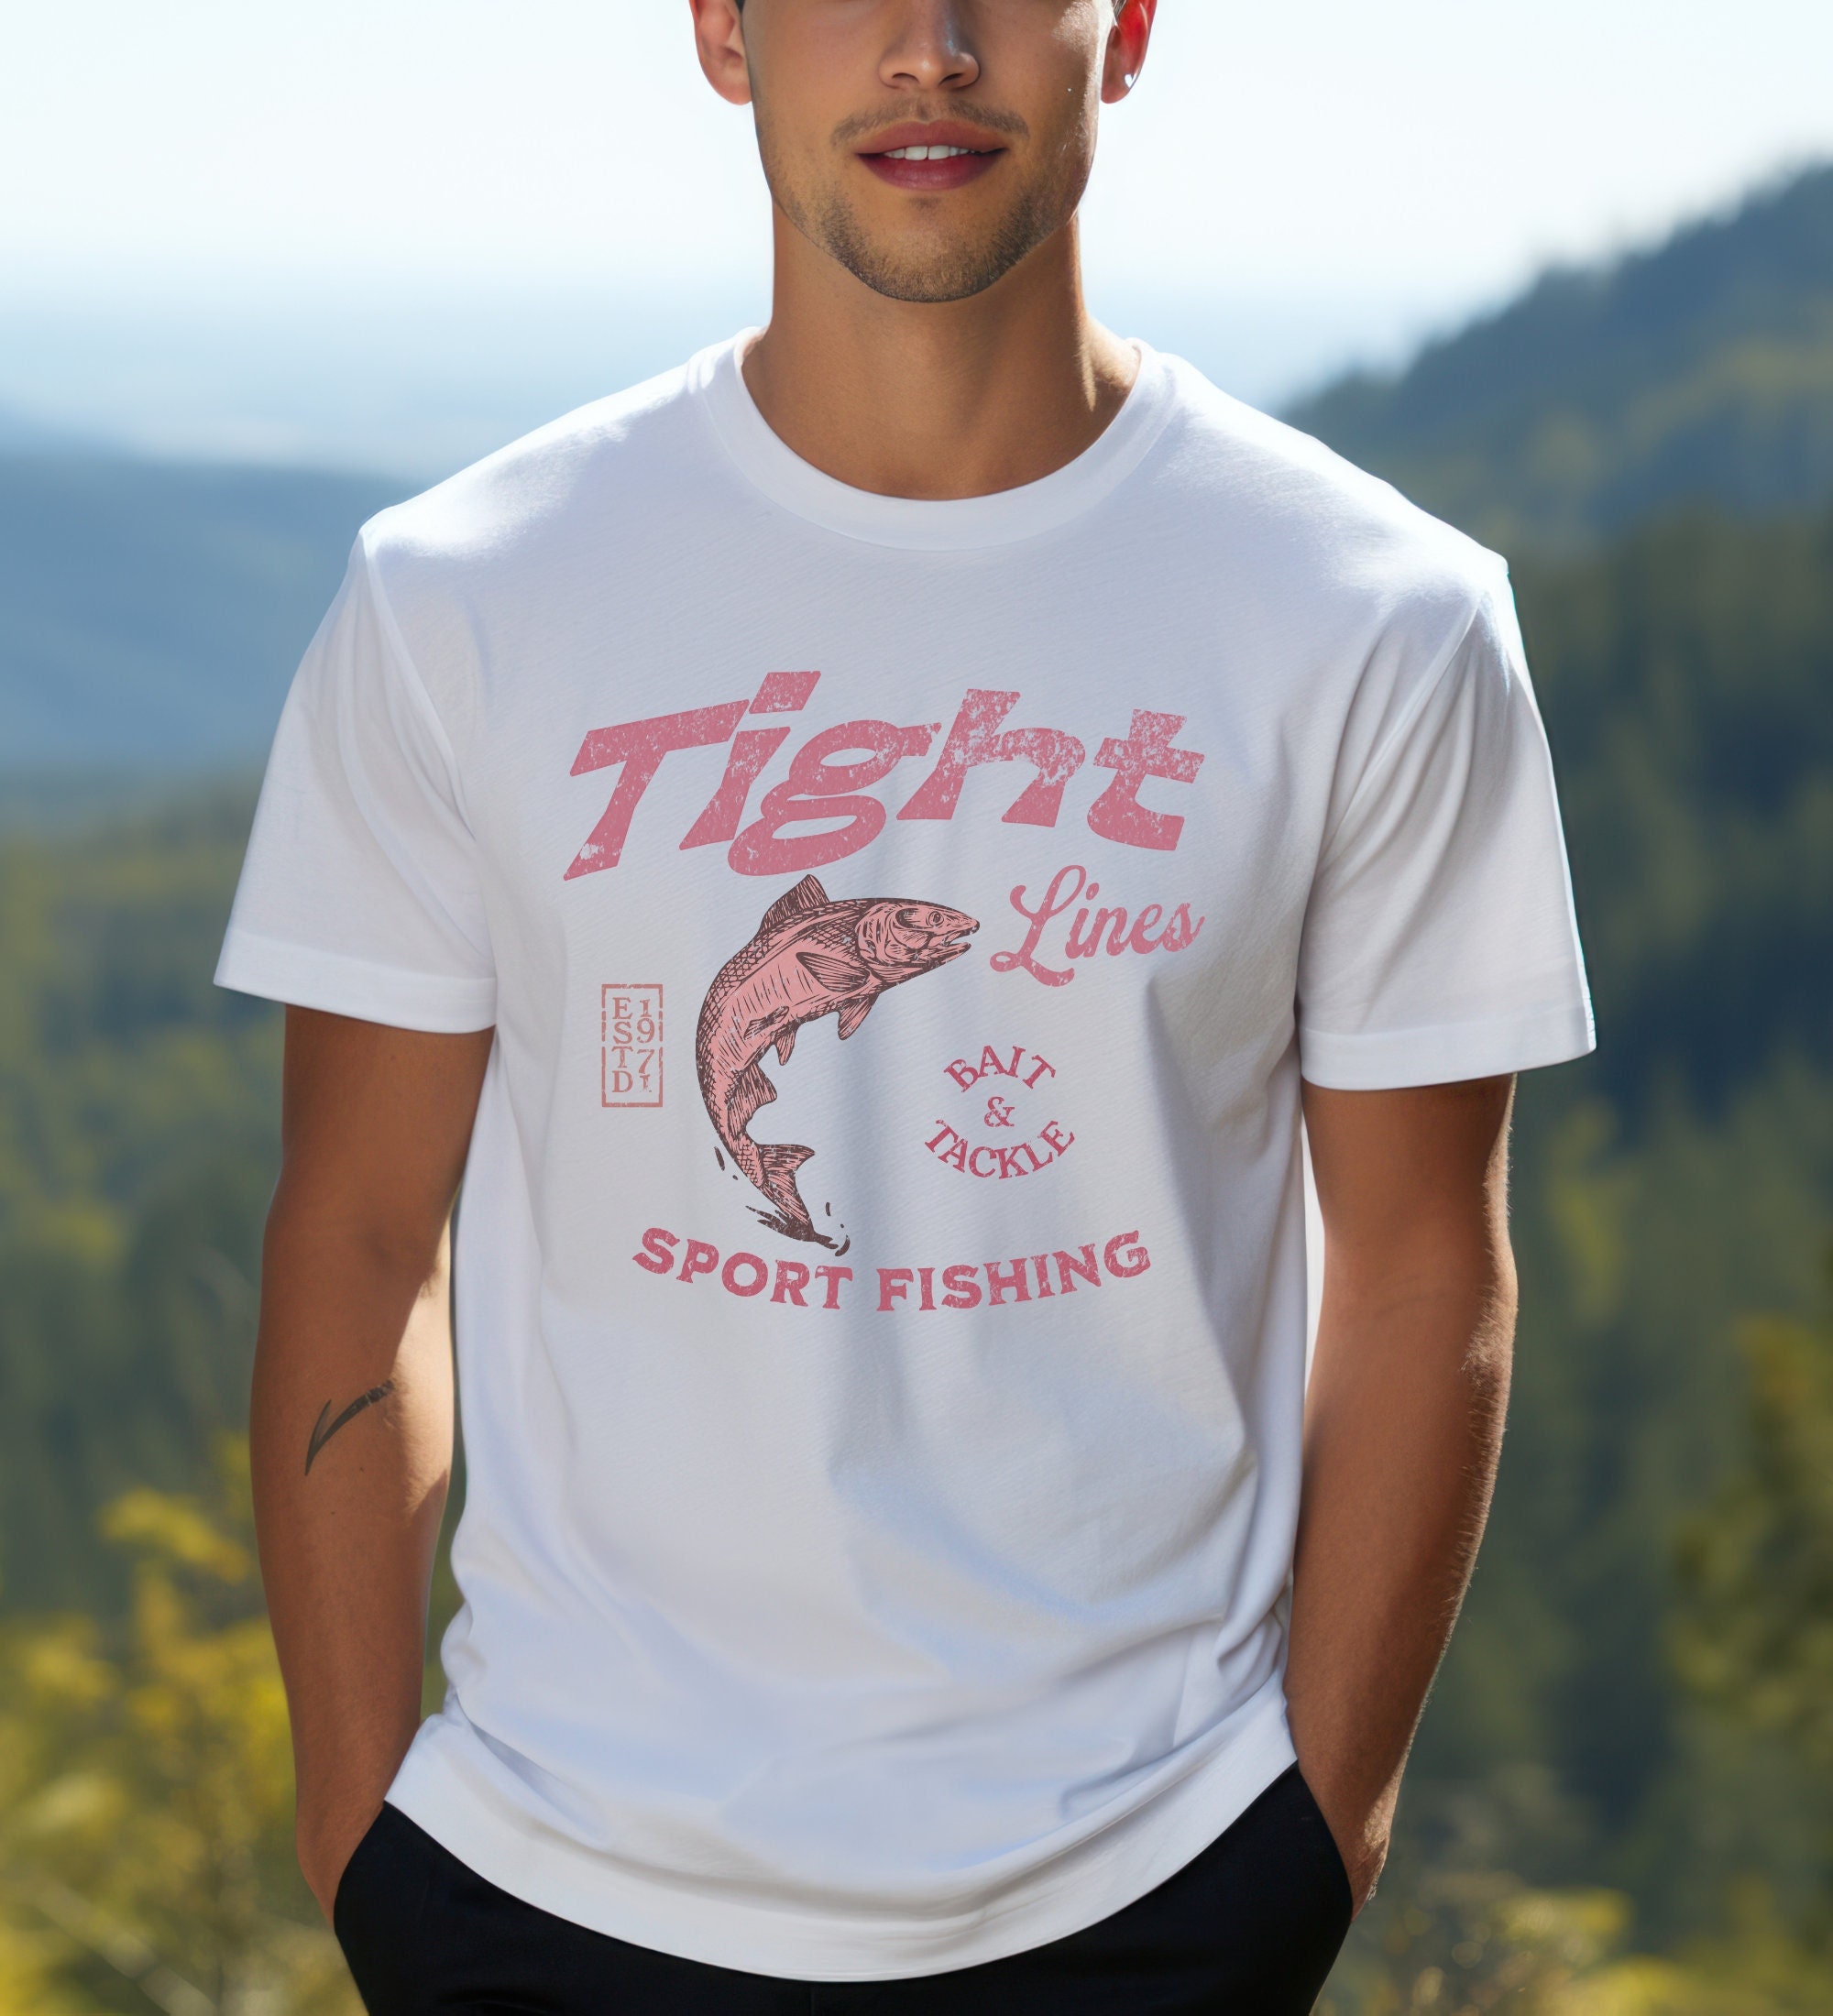 Tight Lines Fish T-Shirt, Fishing Shirt, Angler Short Sleeve Tee, Outdoor Activewear, Gift for Fisherman Dad Son, Father's Day Gift